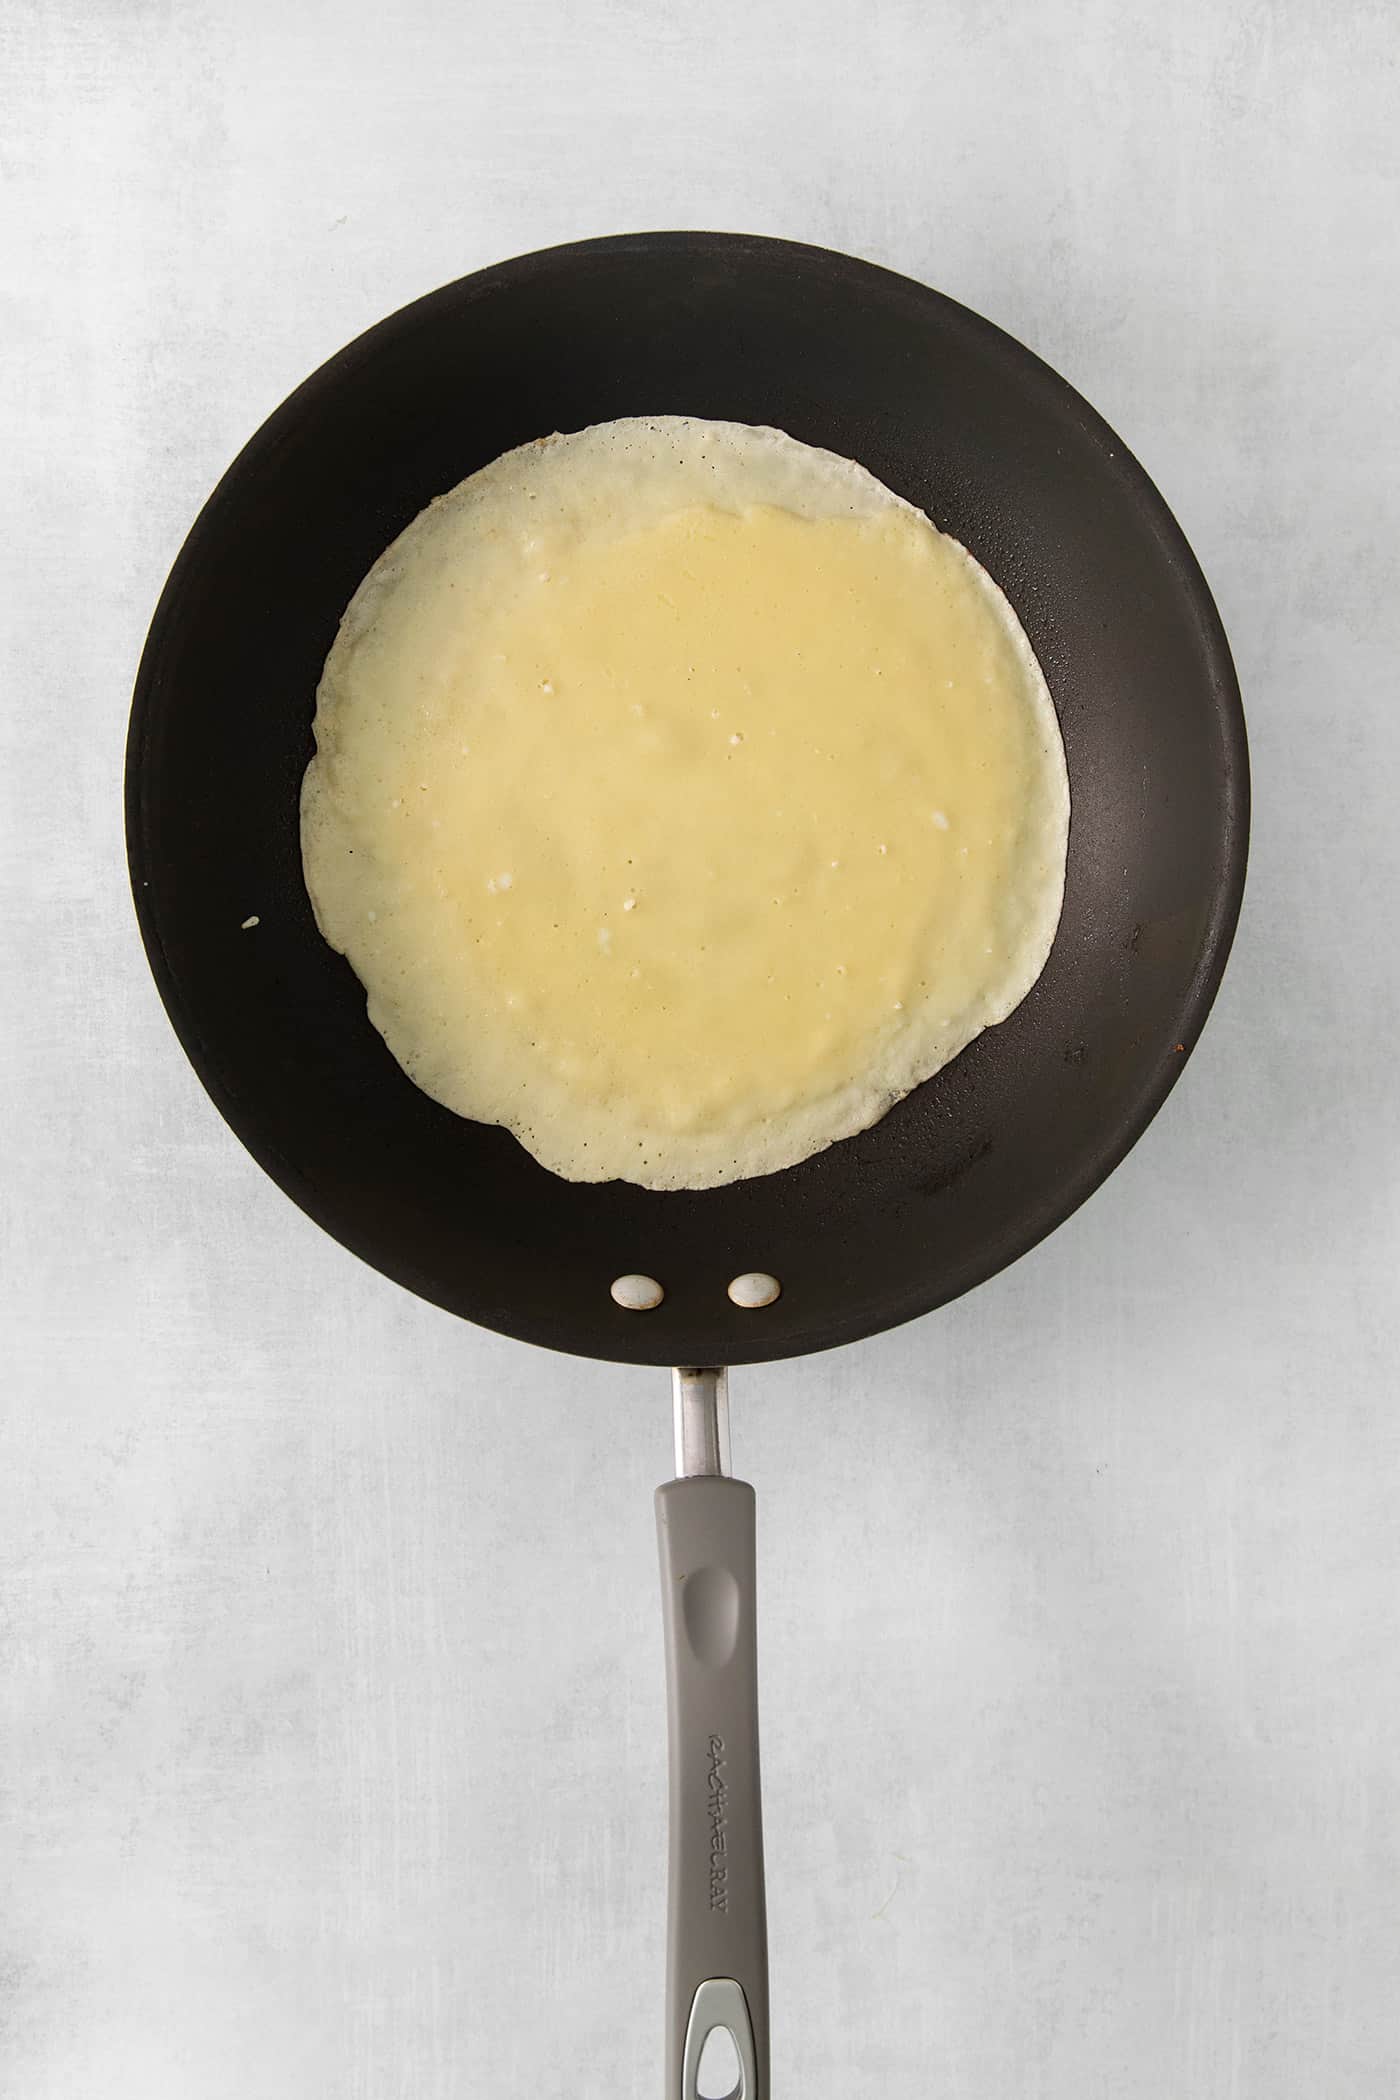 Cooking a crepe in a pan.